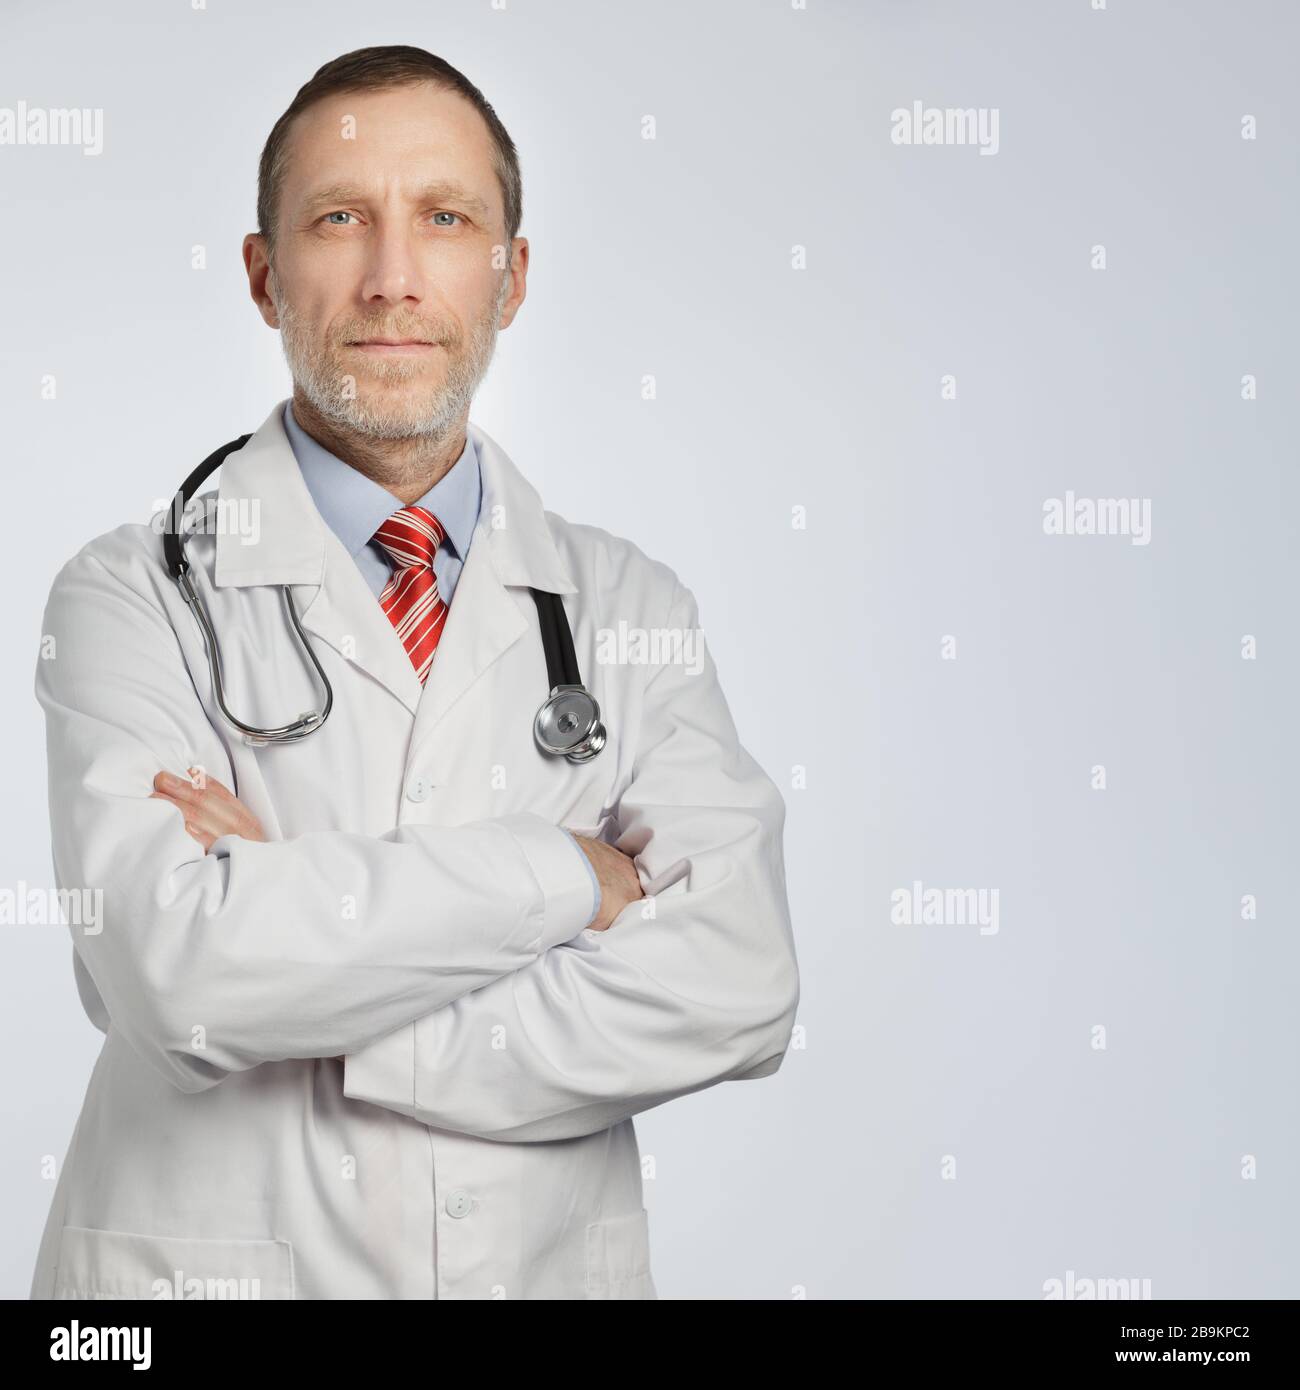 Medical doctor portrait on white background with space for text. Phonendoscope on the shoulders. Stock Photo